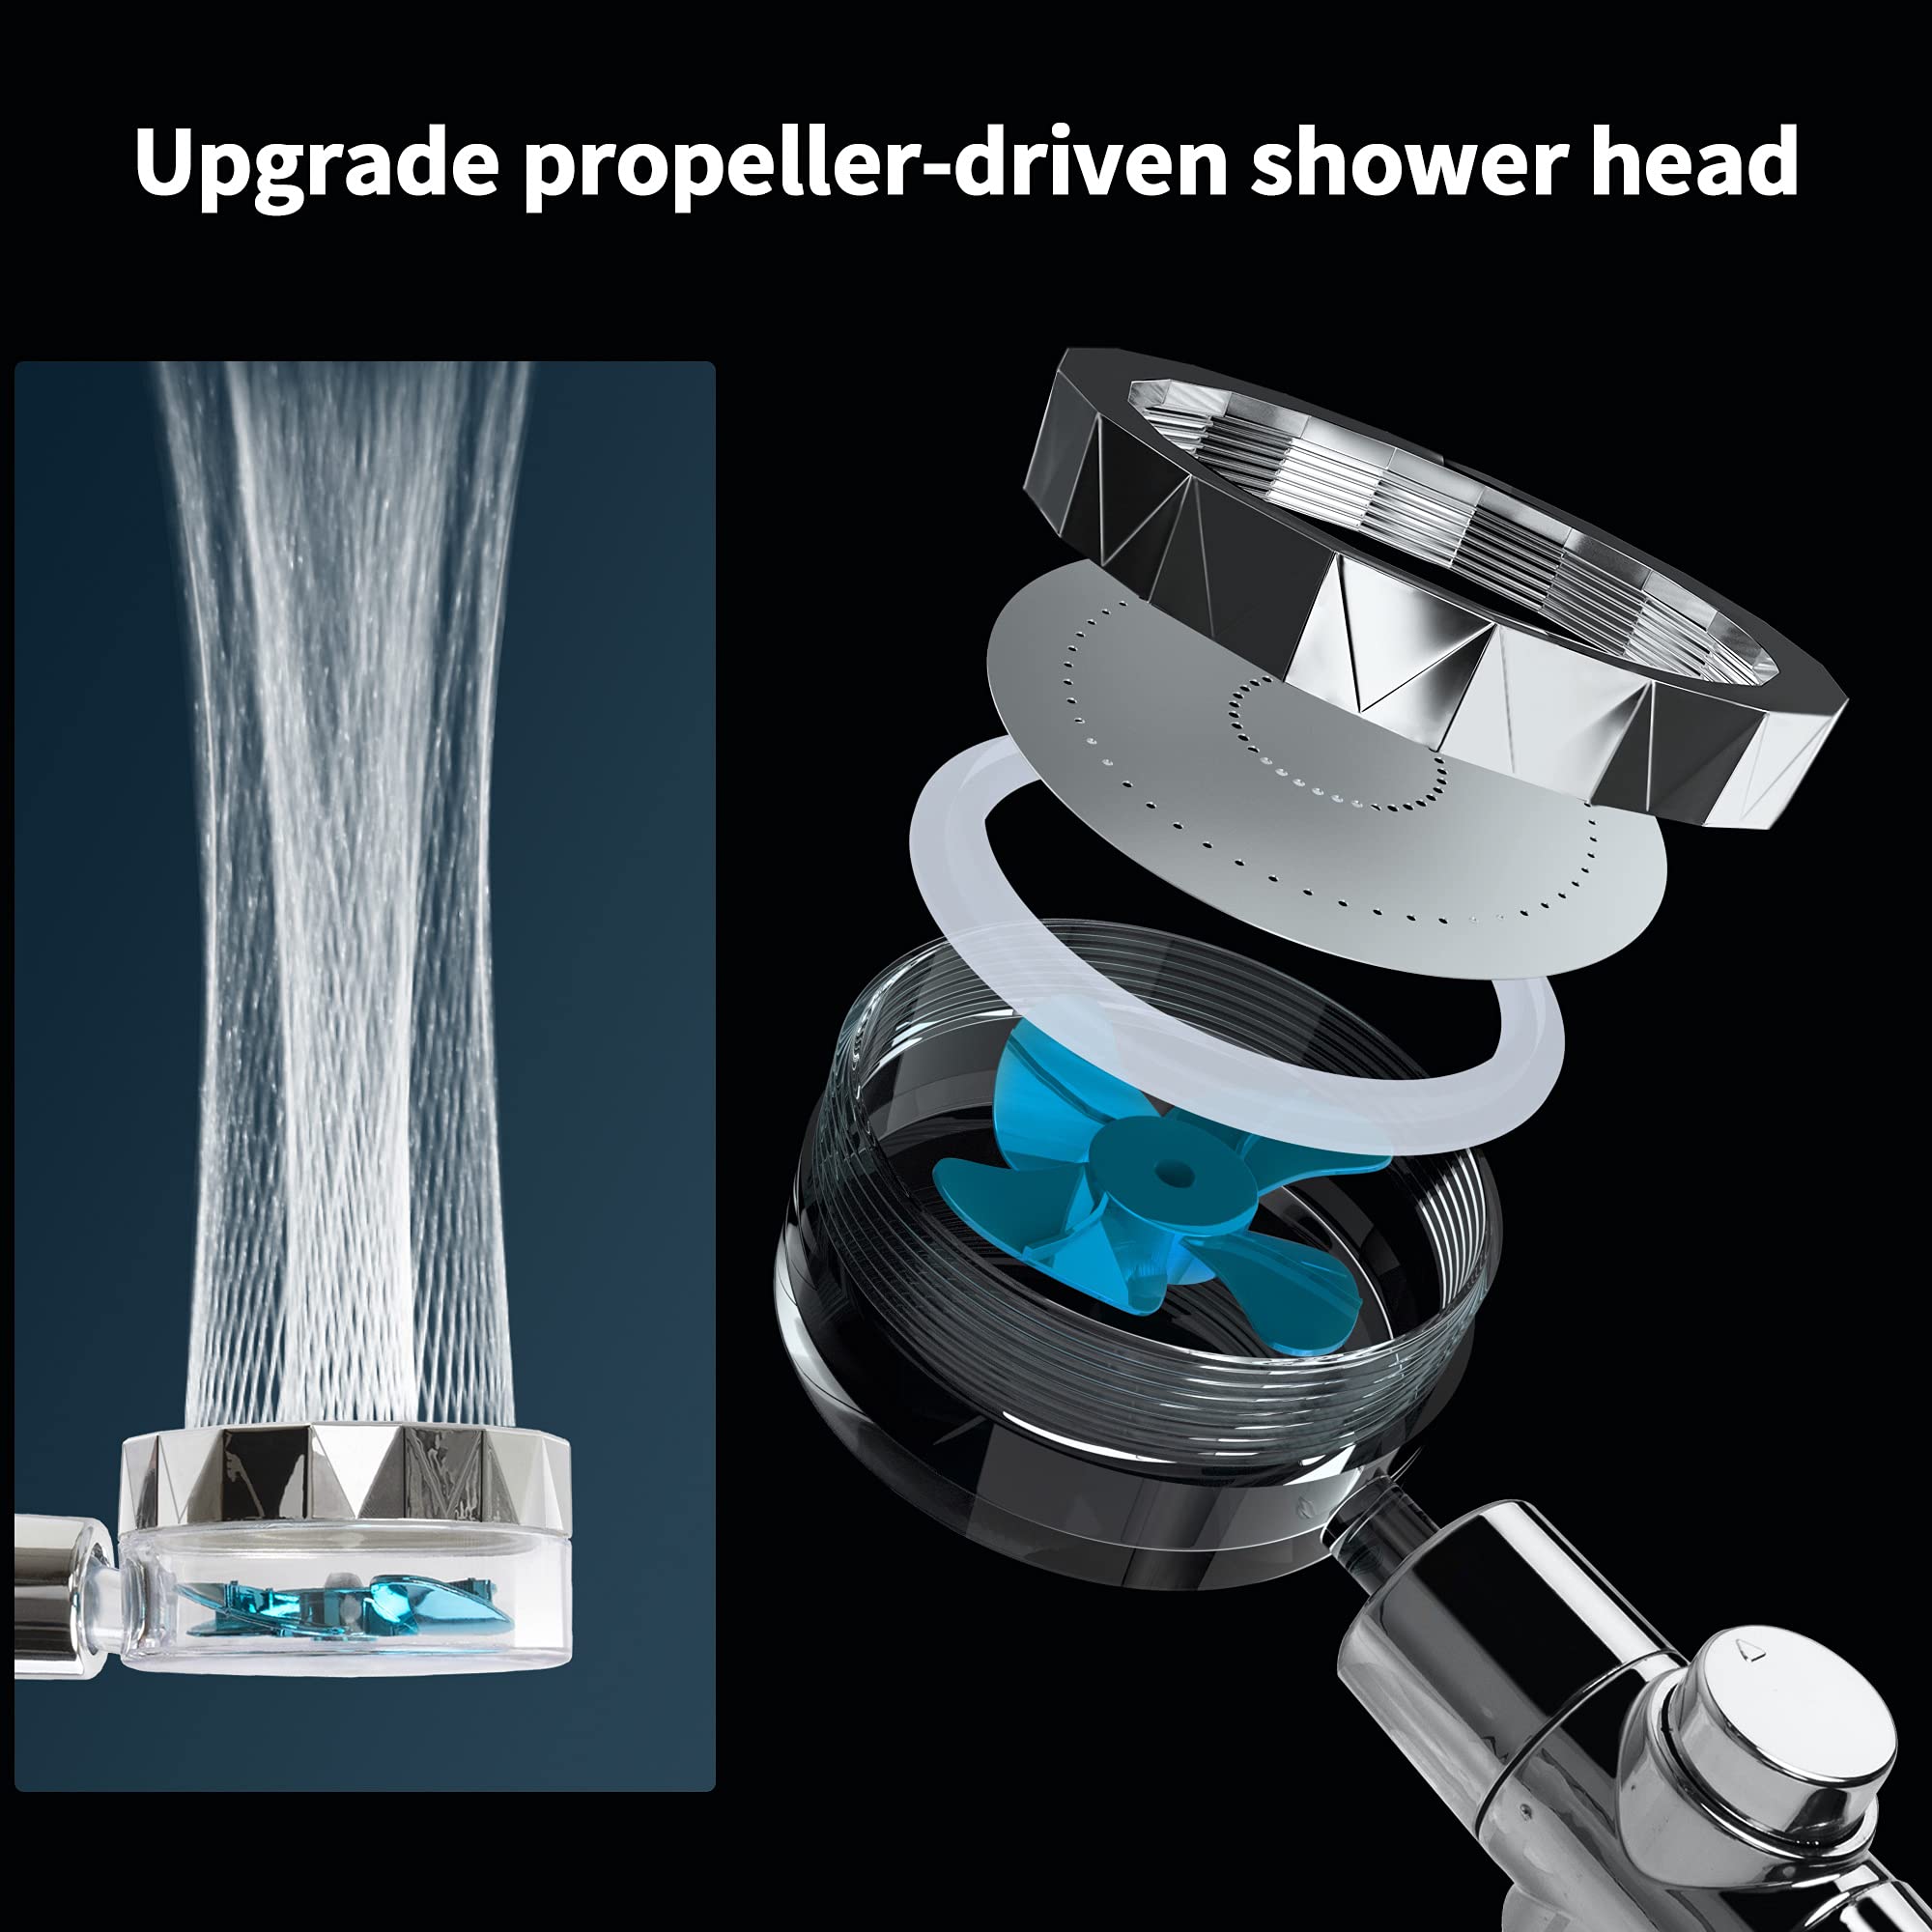 High Pressure Shower Heads, Handheld Turbo Fan Shower, Hydro Jet Shower Head Kit with 3 Filters and Pause Switch, water softener shower head hydro shower jet head Turbocharged Shower Head